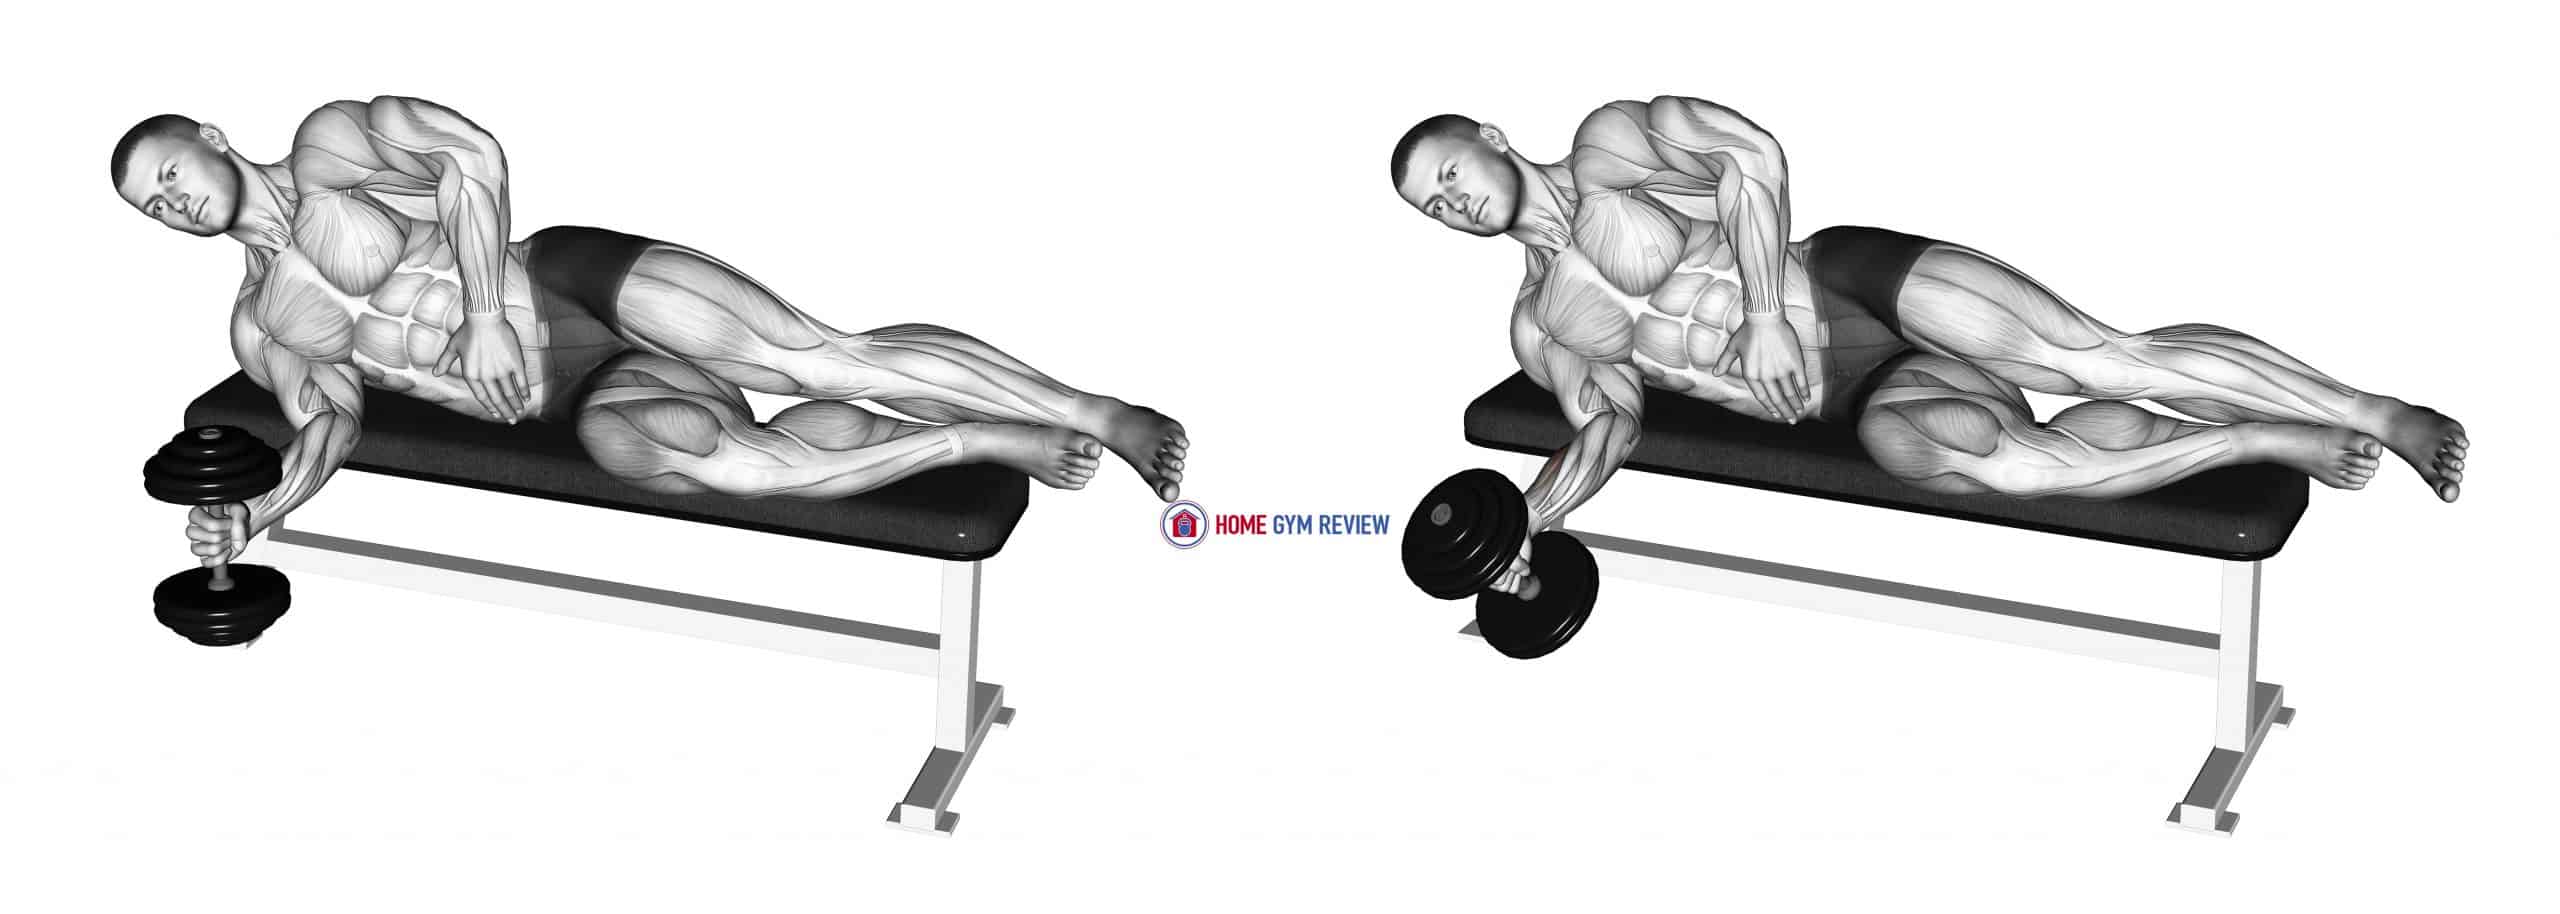 Dumbbell Lying Supination